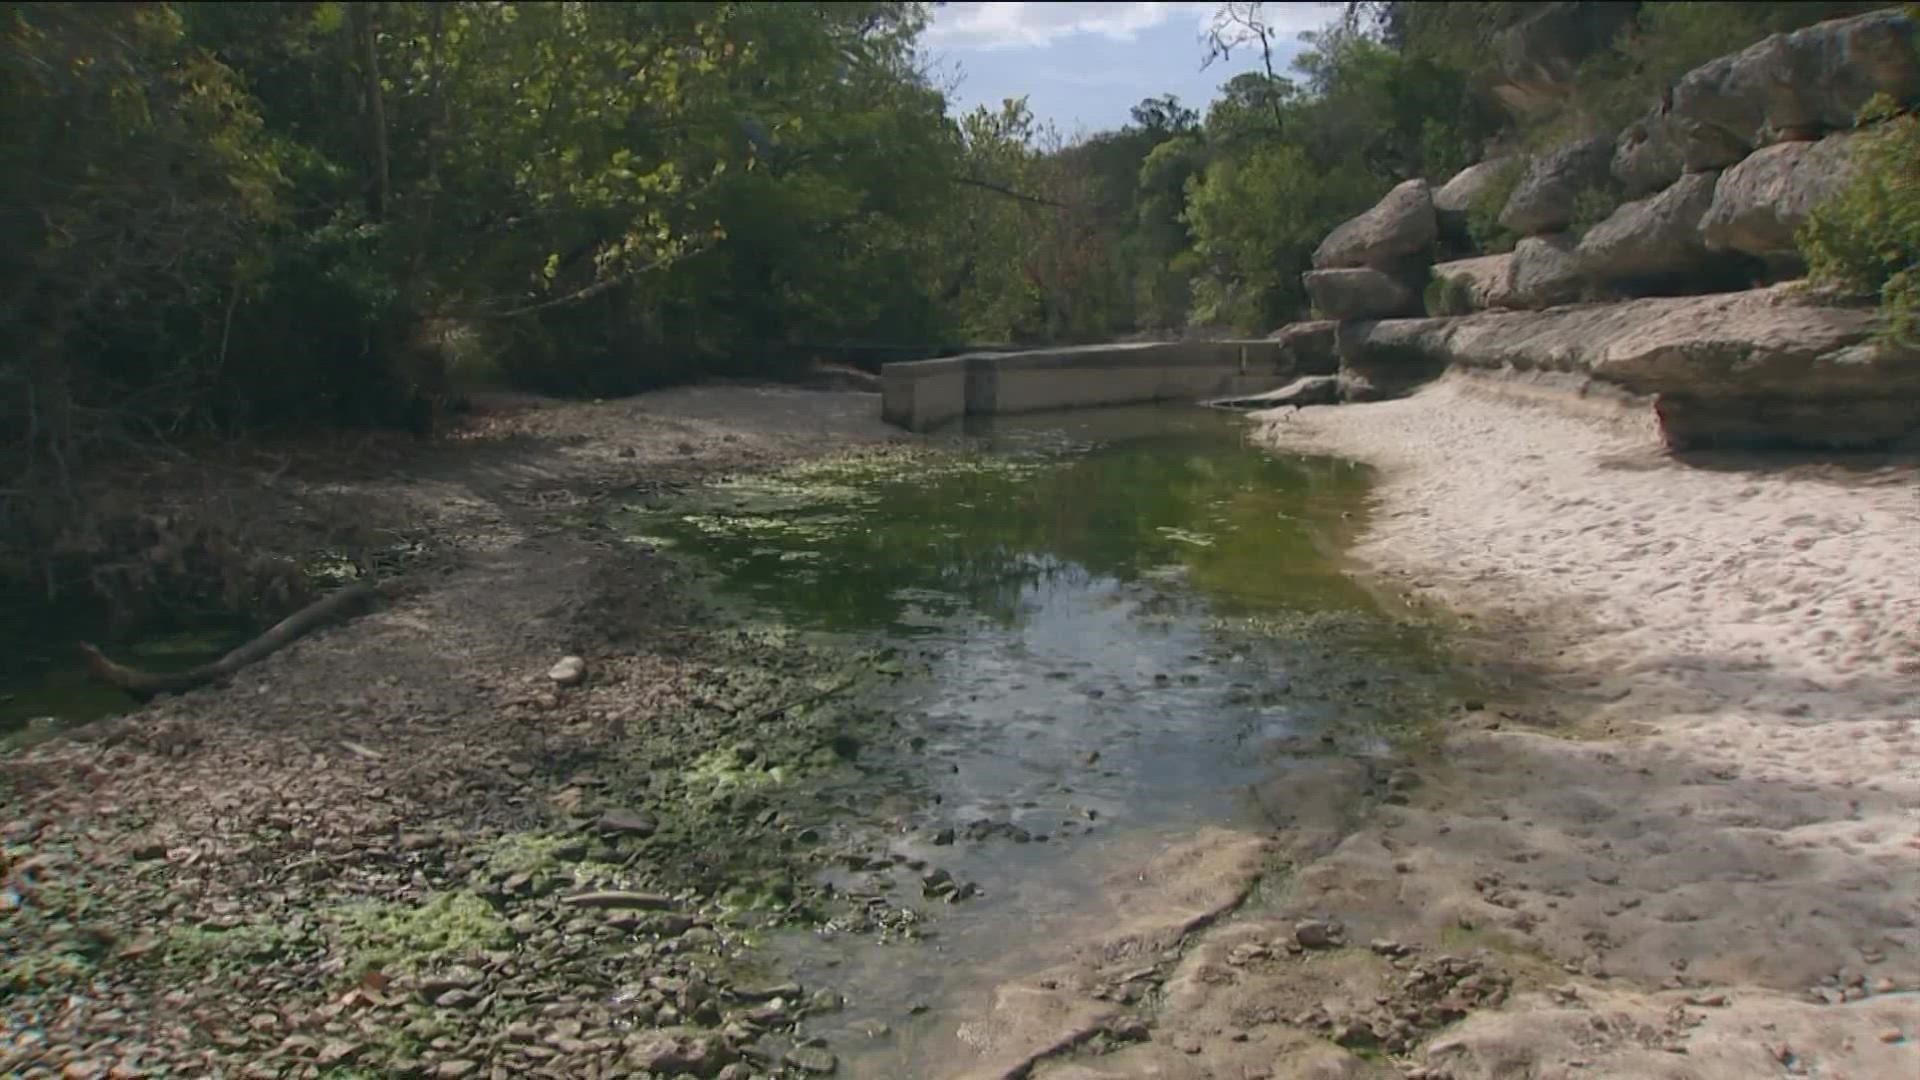 This is only one of a handful of times in recorded history that water has stopped flowing at the swimming hole.